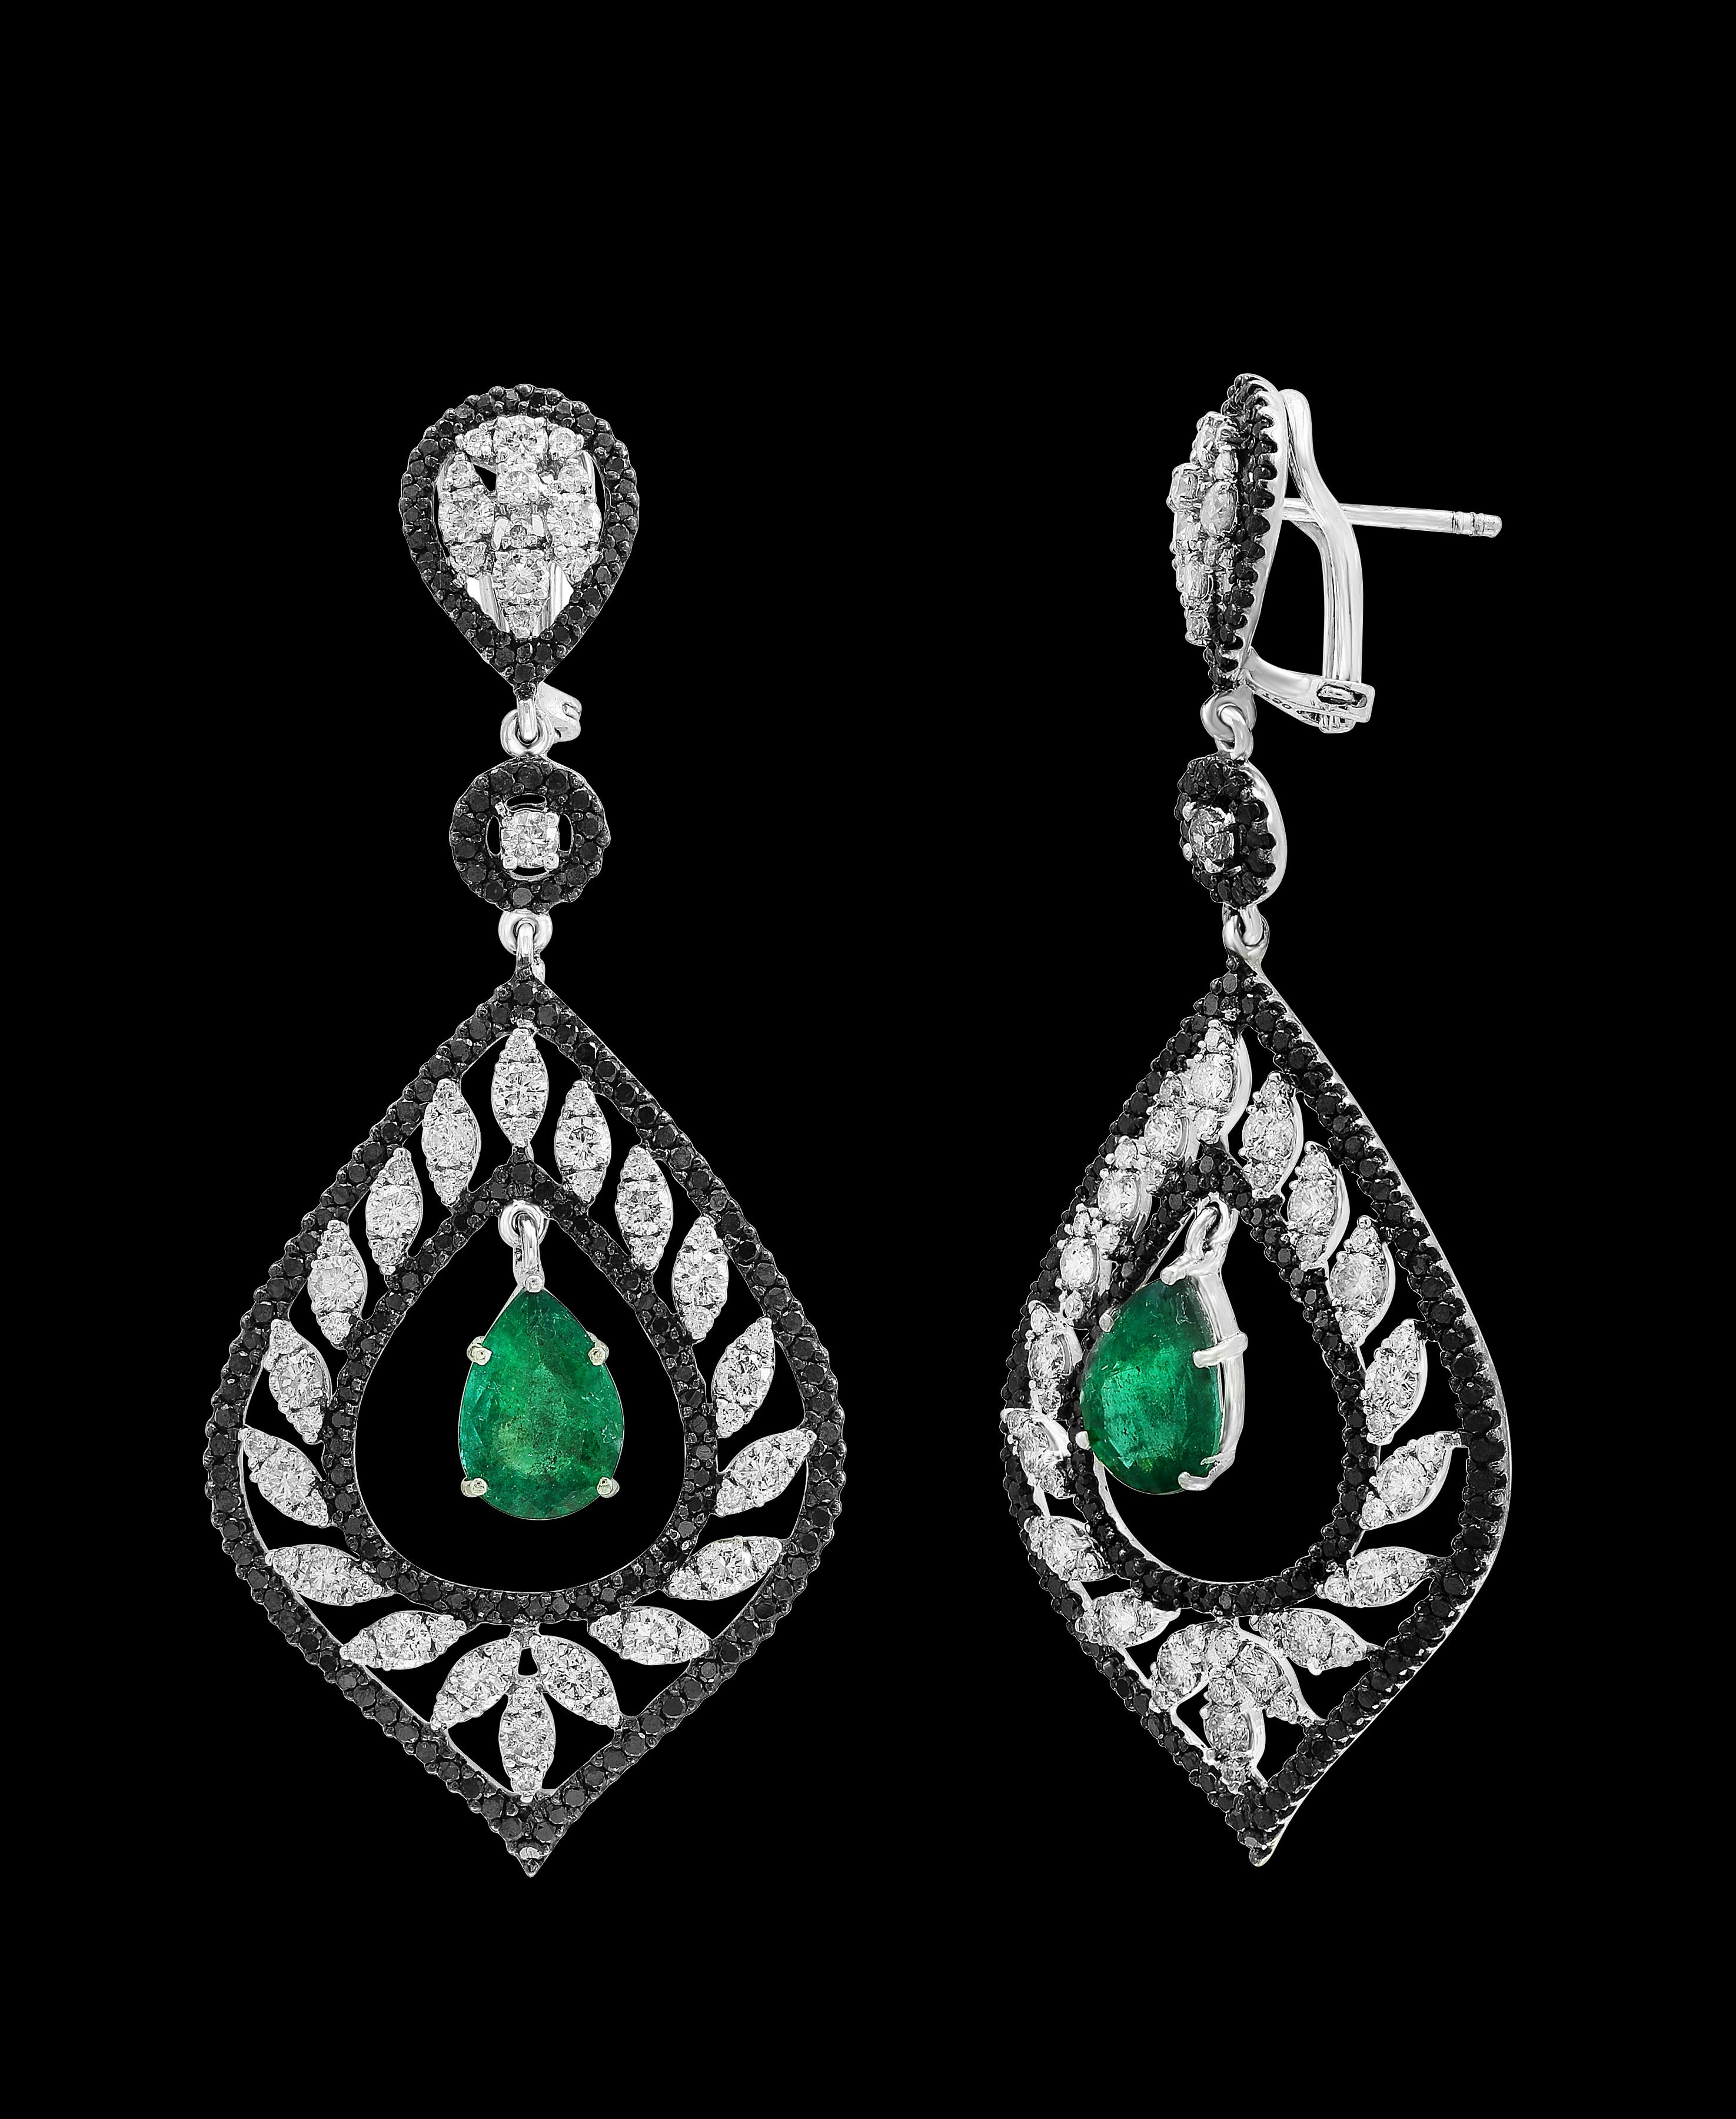 GIA Report # 5222835253
Natural  Beryl 
Origin Zambia
Approximately 6 Carat Certified by GIA Pear Shape Zambian  Emerald Diamond  Hanging Earrings 18 Karat  White Gold
This exquisite pair of earrings are beautifully crafted with 18 karat White gold 